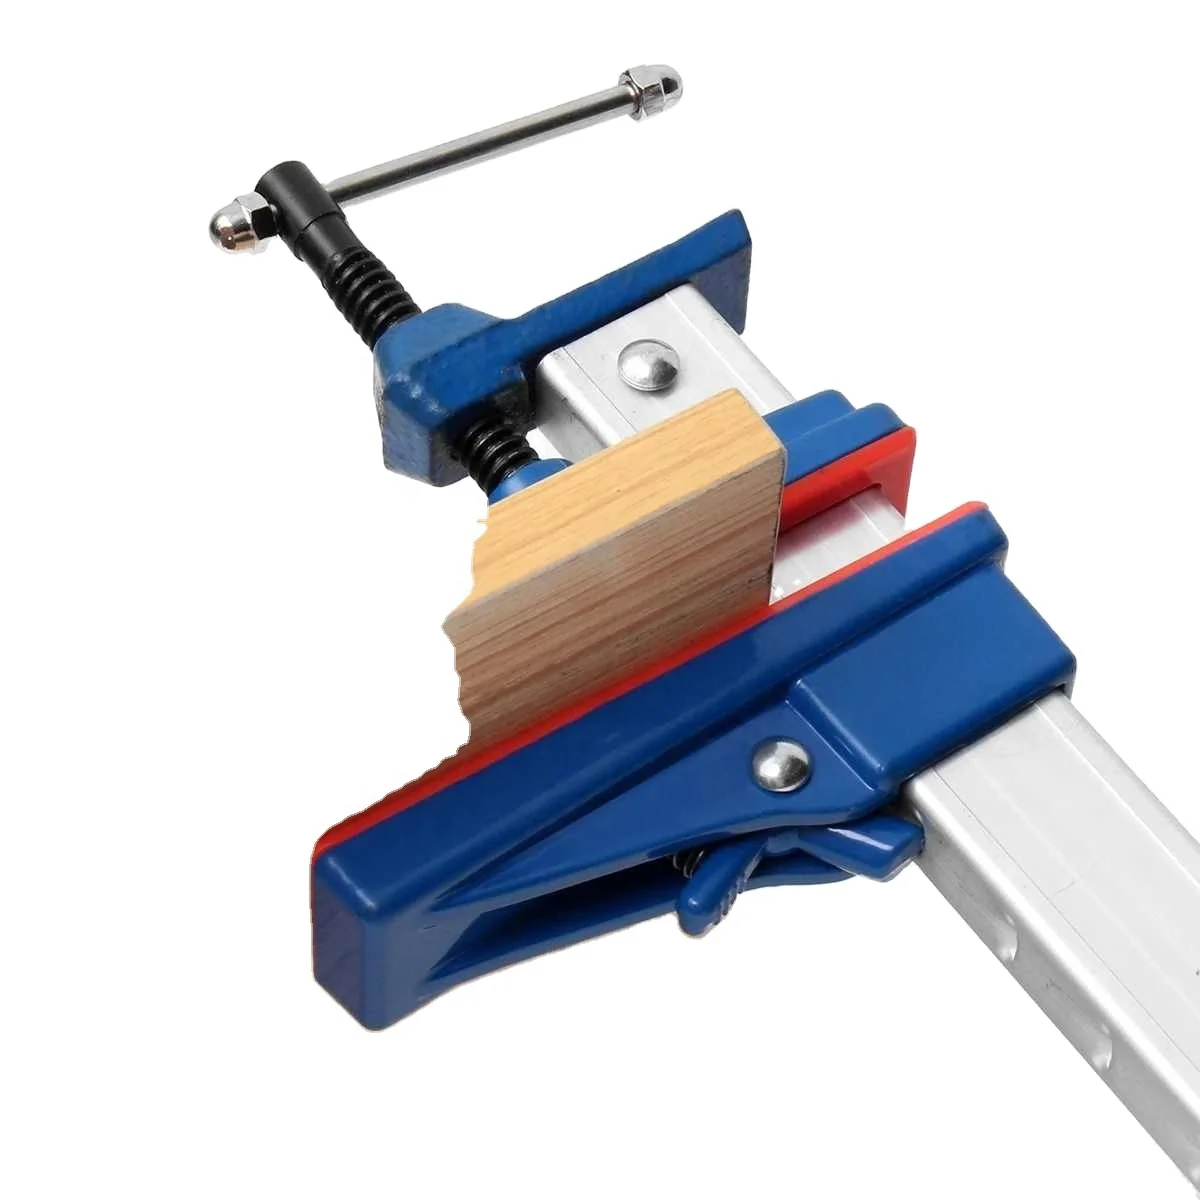 F Clamp Bar For Woodworking Clamp Clip Grip Diy T Wood Clamps Quick Ratchet Release Wooden Carpentry Hand Tool Buy Horizontal Fixed Pressure Plate Woodworking Fixture Woodworking Quick Clamp Product On Alibaba Com